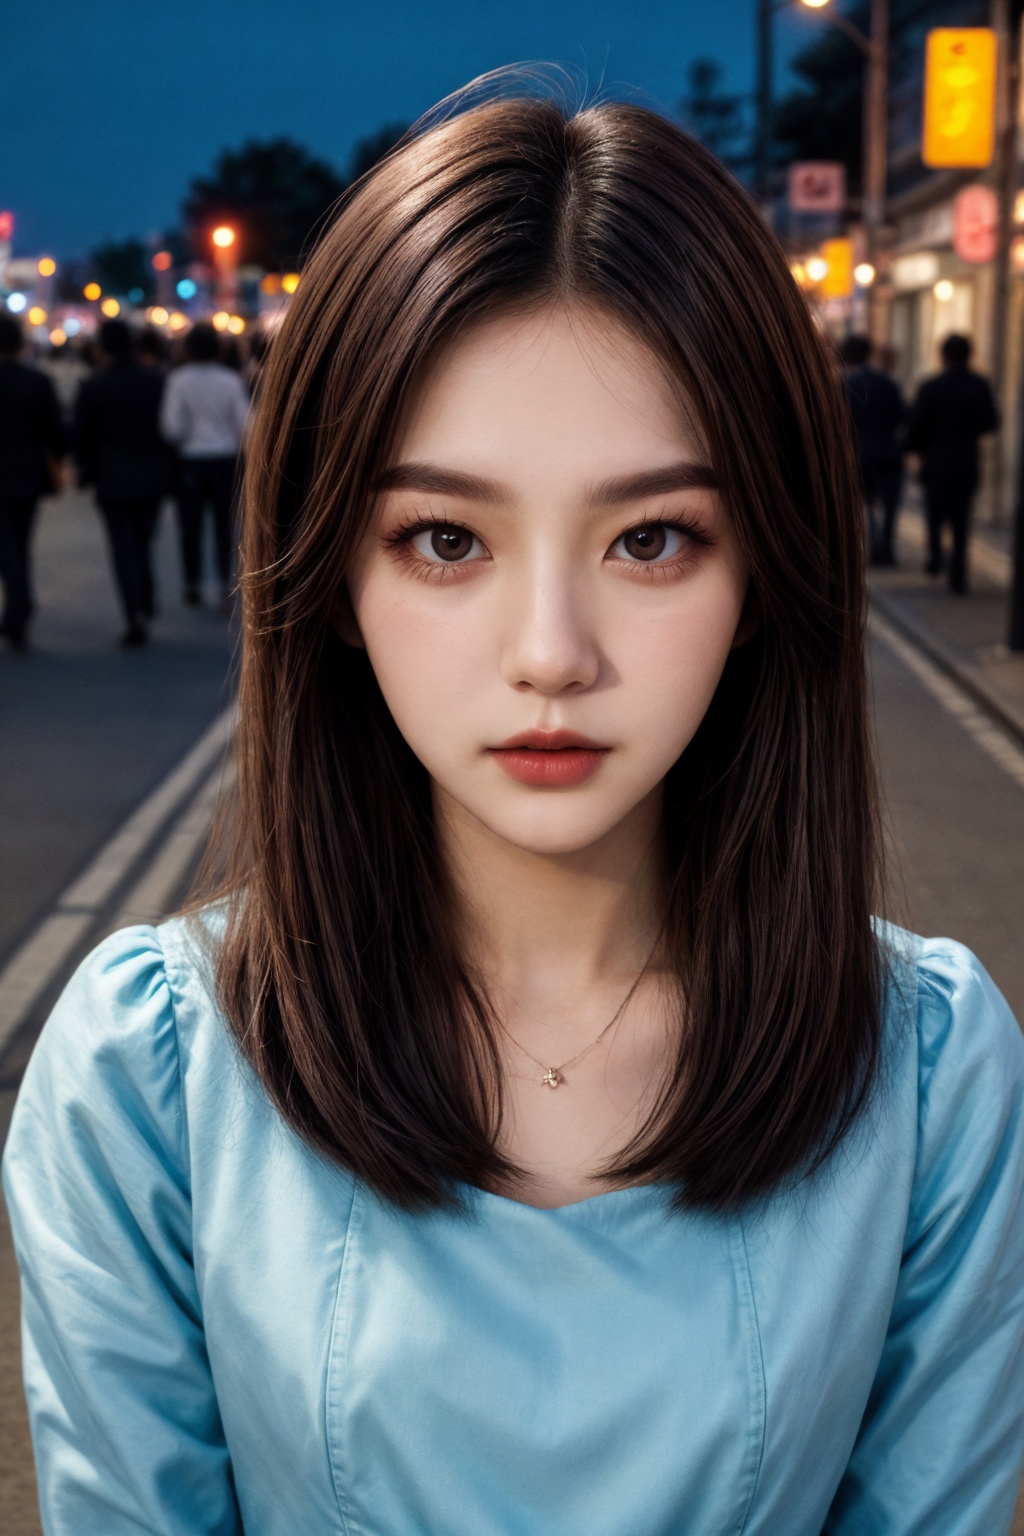 instagram photo, closeup face photo of 18 y.o woman in dress, beautiful face, makeup, night city street,shot from above